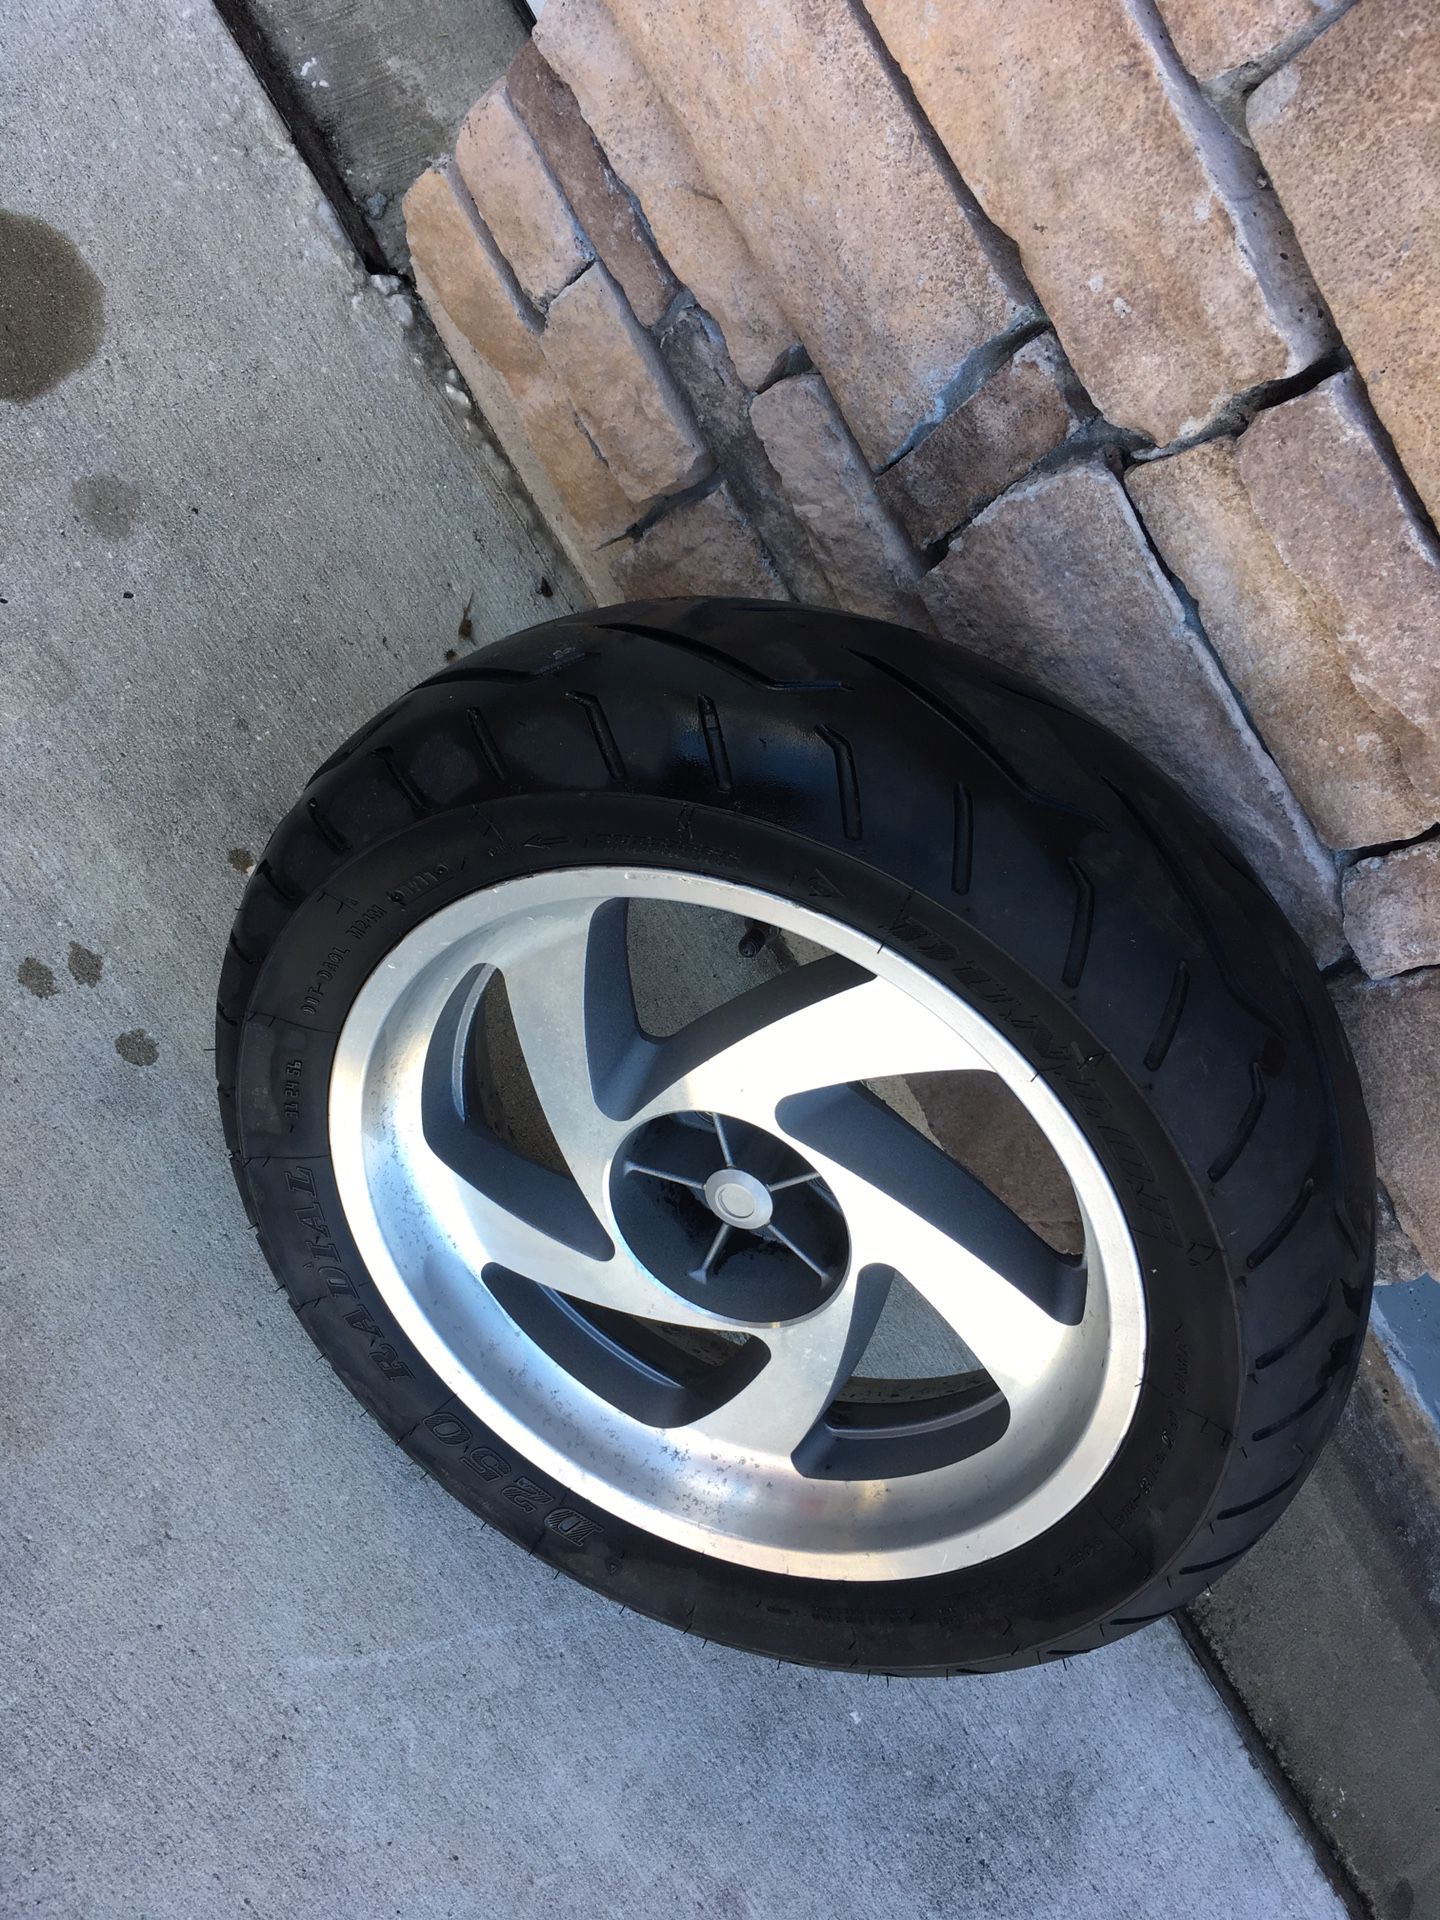 Goldwing parts, wheel, tire, bags